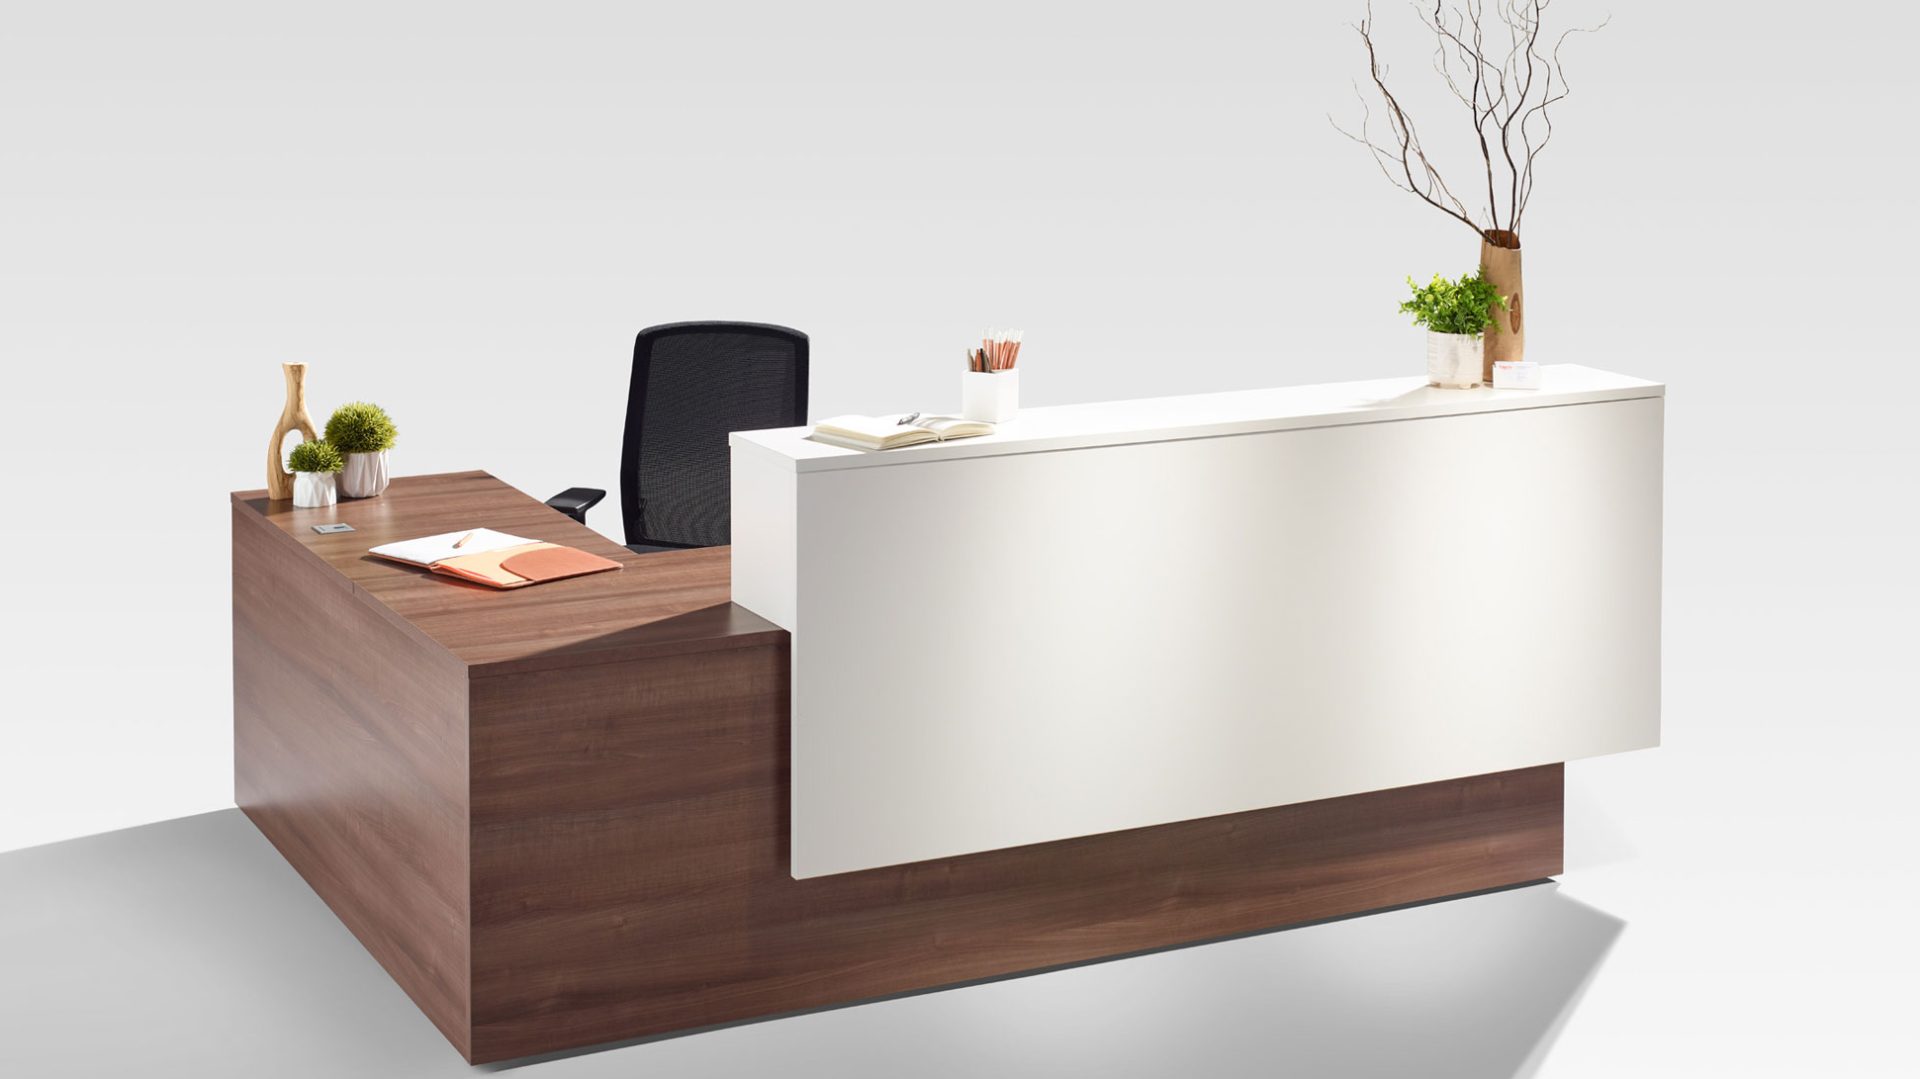 <h1>Say Hello to Tayco's new Reception Collection!</h1>